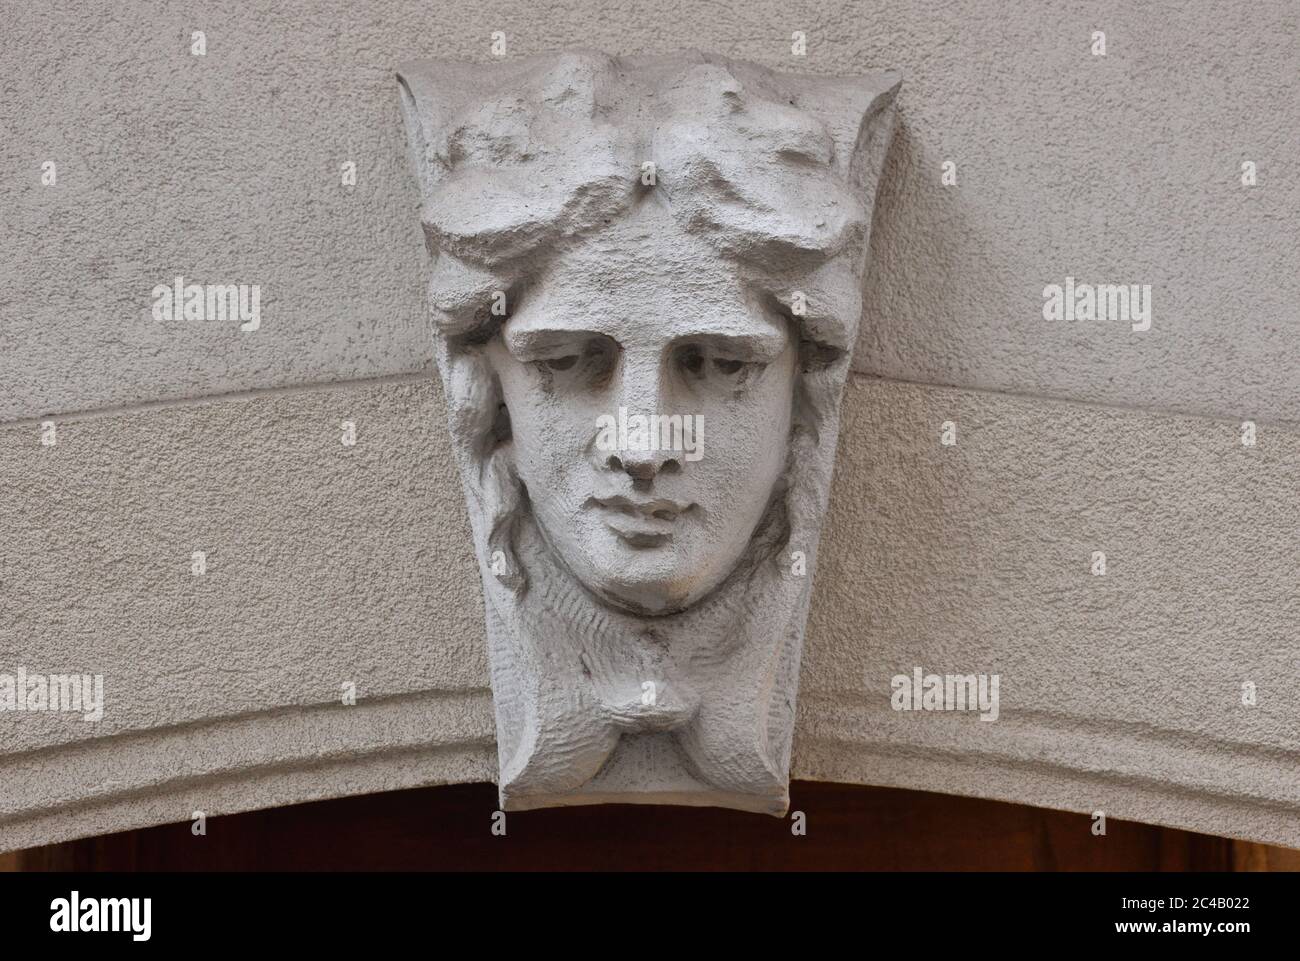 Stone tympanum building feature of a downward-looking face on a curved arch over a doorway, Feb. 22, 2020, in New York. Stock Photo